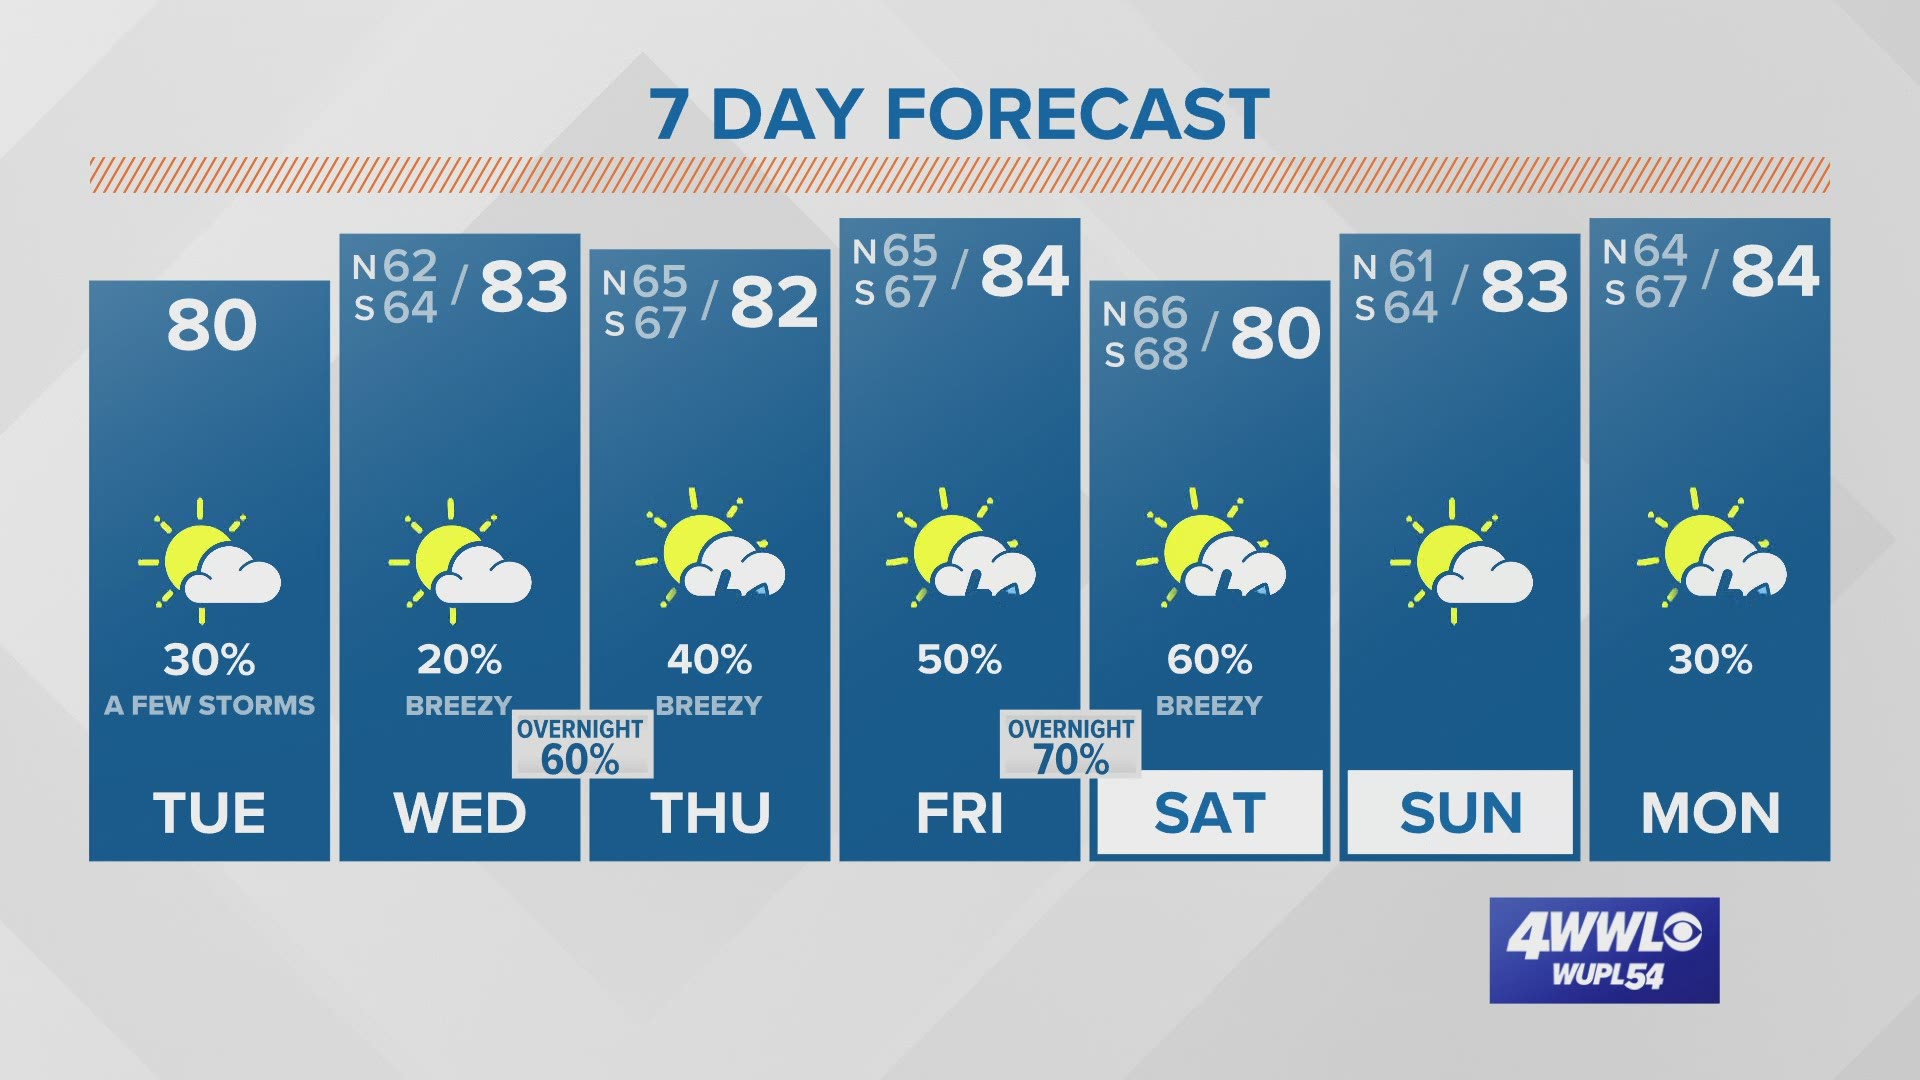 Your Tuesday Forecast: A warm week with spotty rain chances